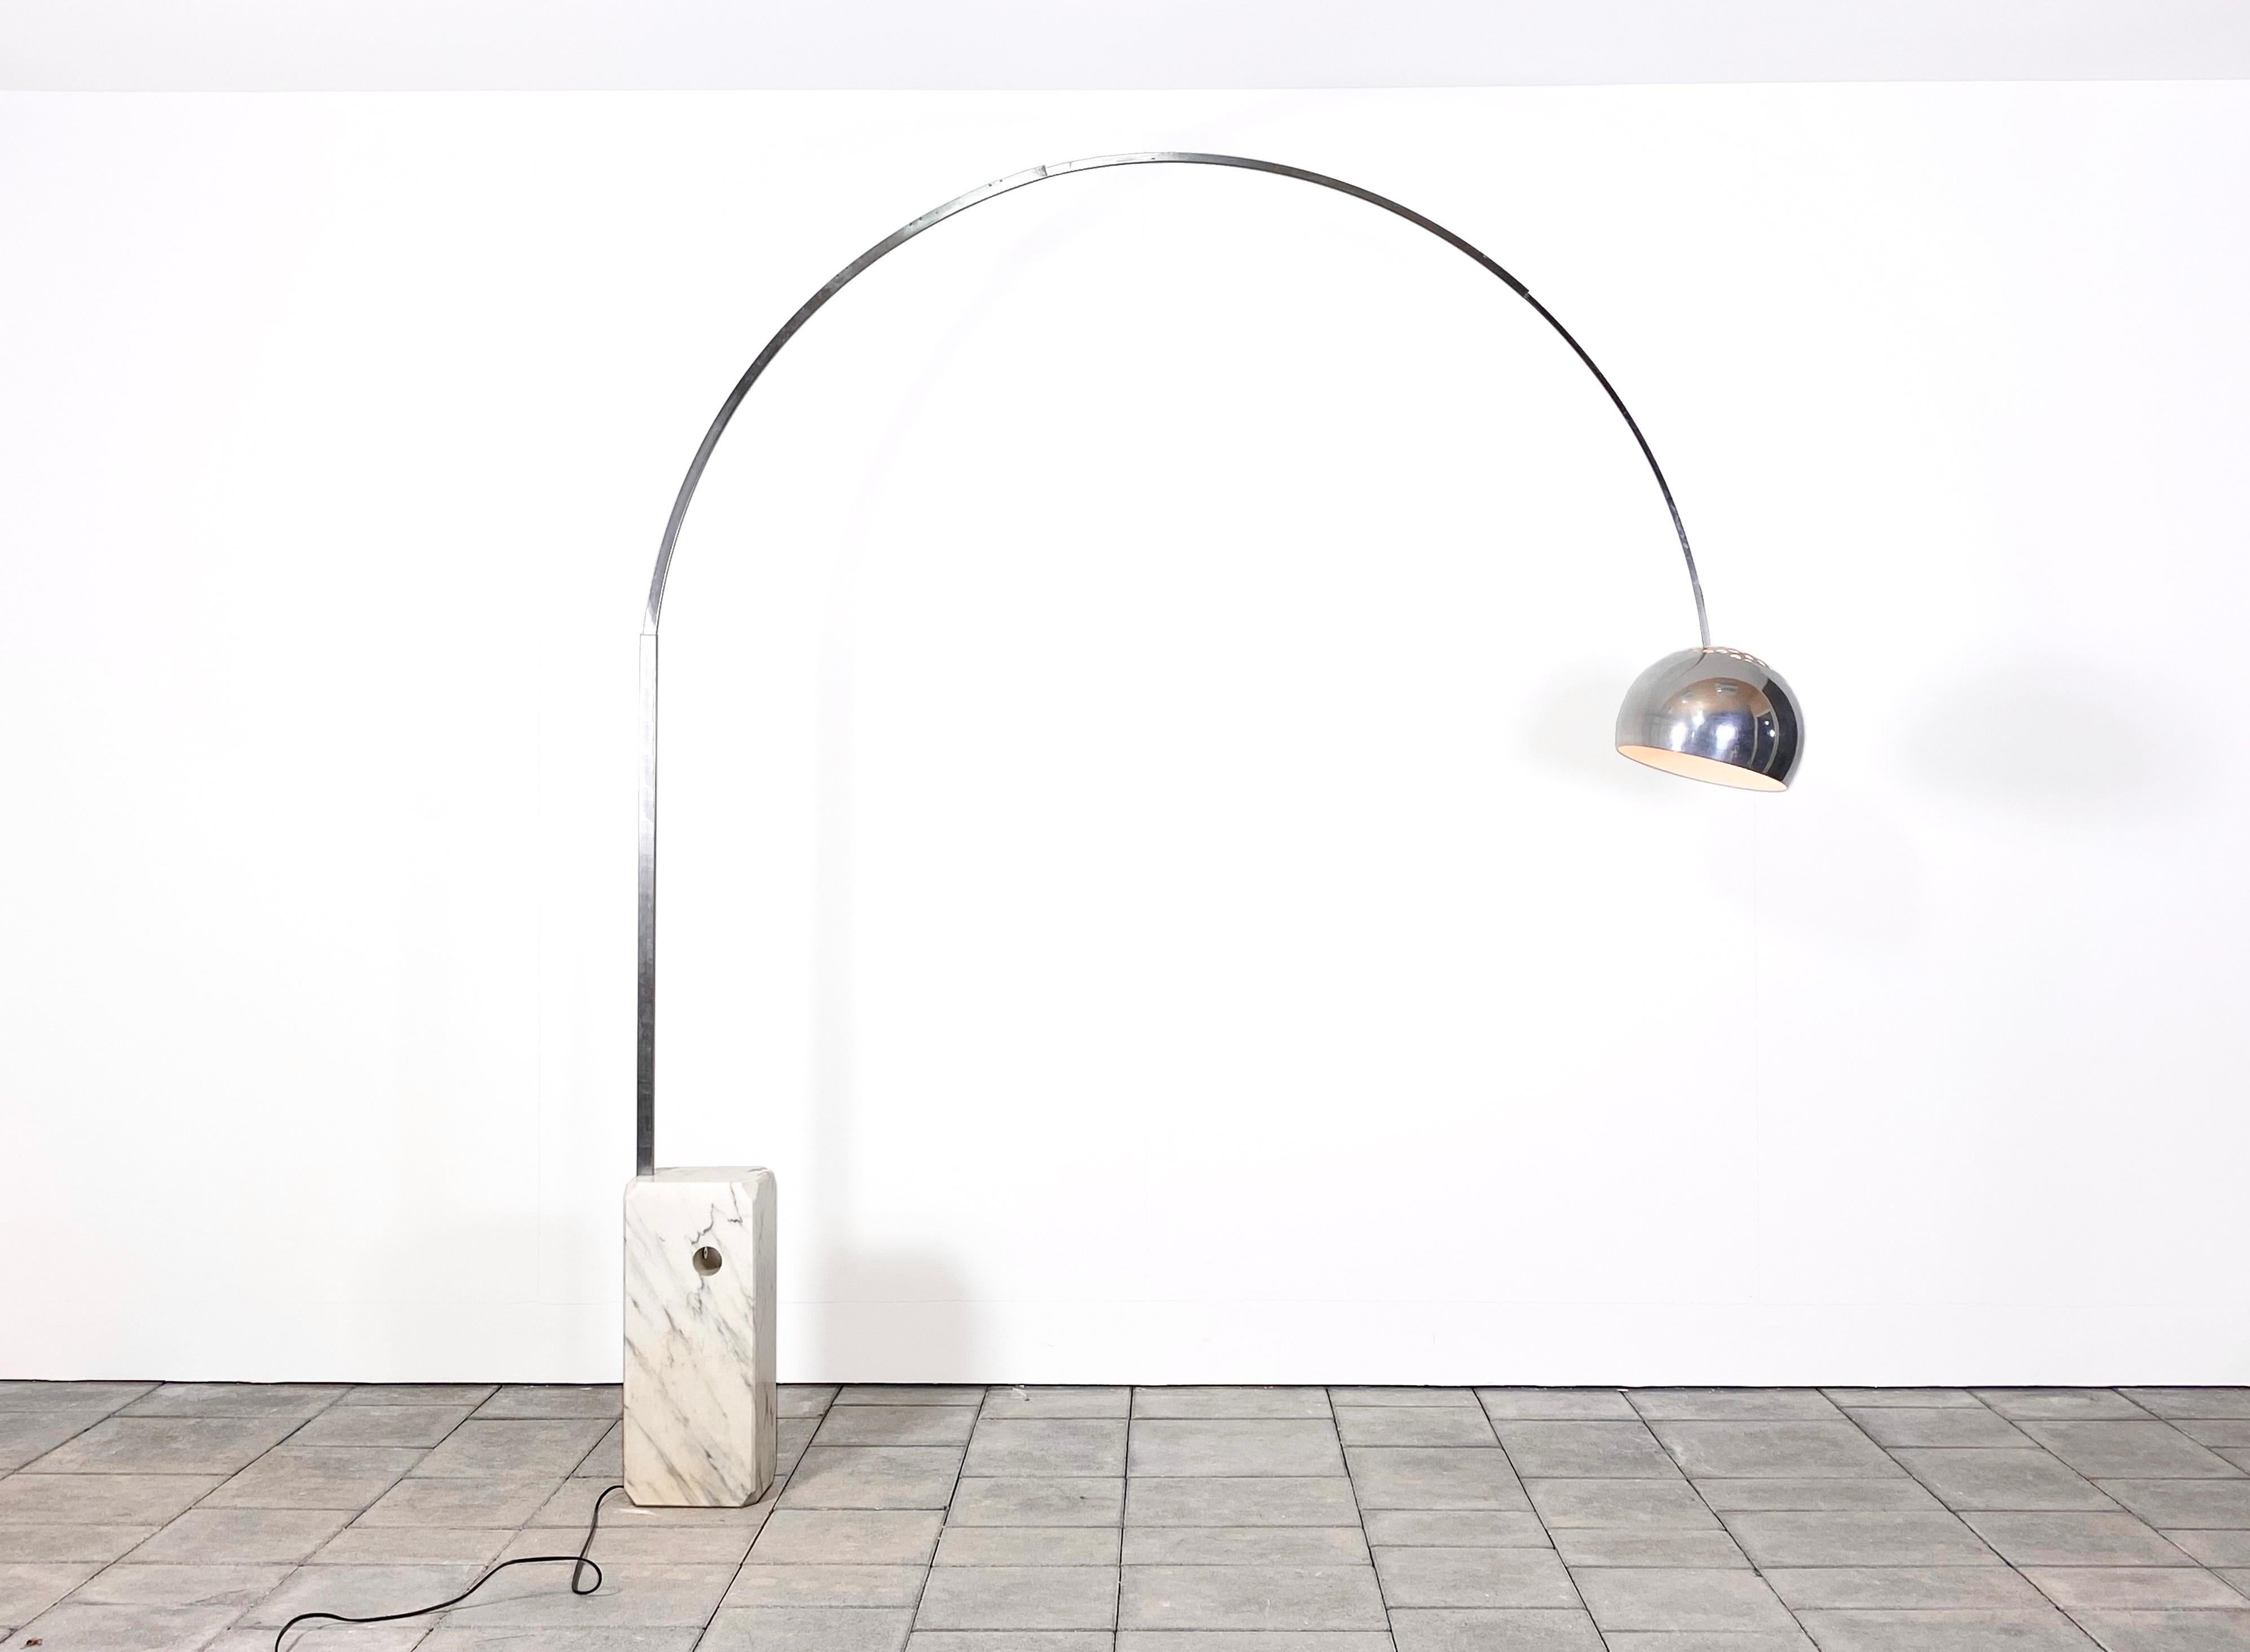 Arco Floor lamp designed by Achille & Pier Giacomo Castiglioni for Flos in 1962

manufactured by Flos, Italy in the 1960ies. With makers bedge on inner side of the lamp shade.

Famous amongst modern Italian designers Achille & Pier Giacomo